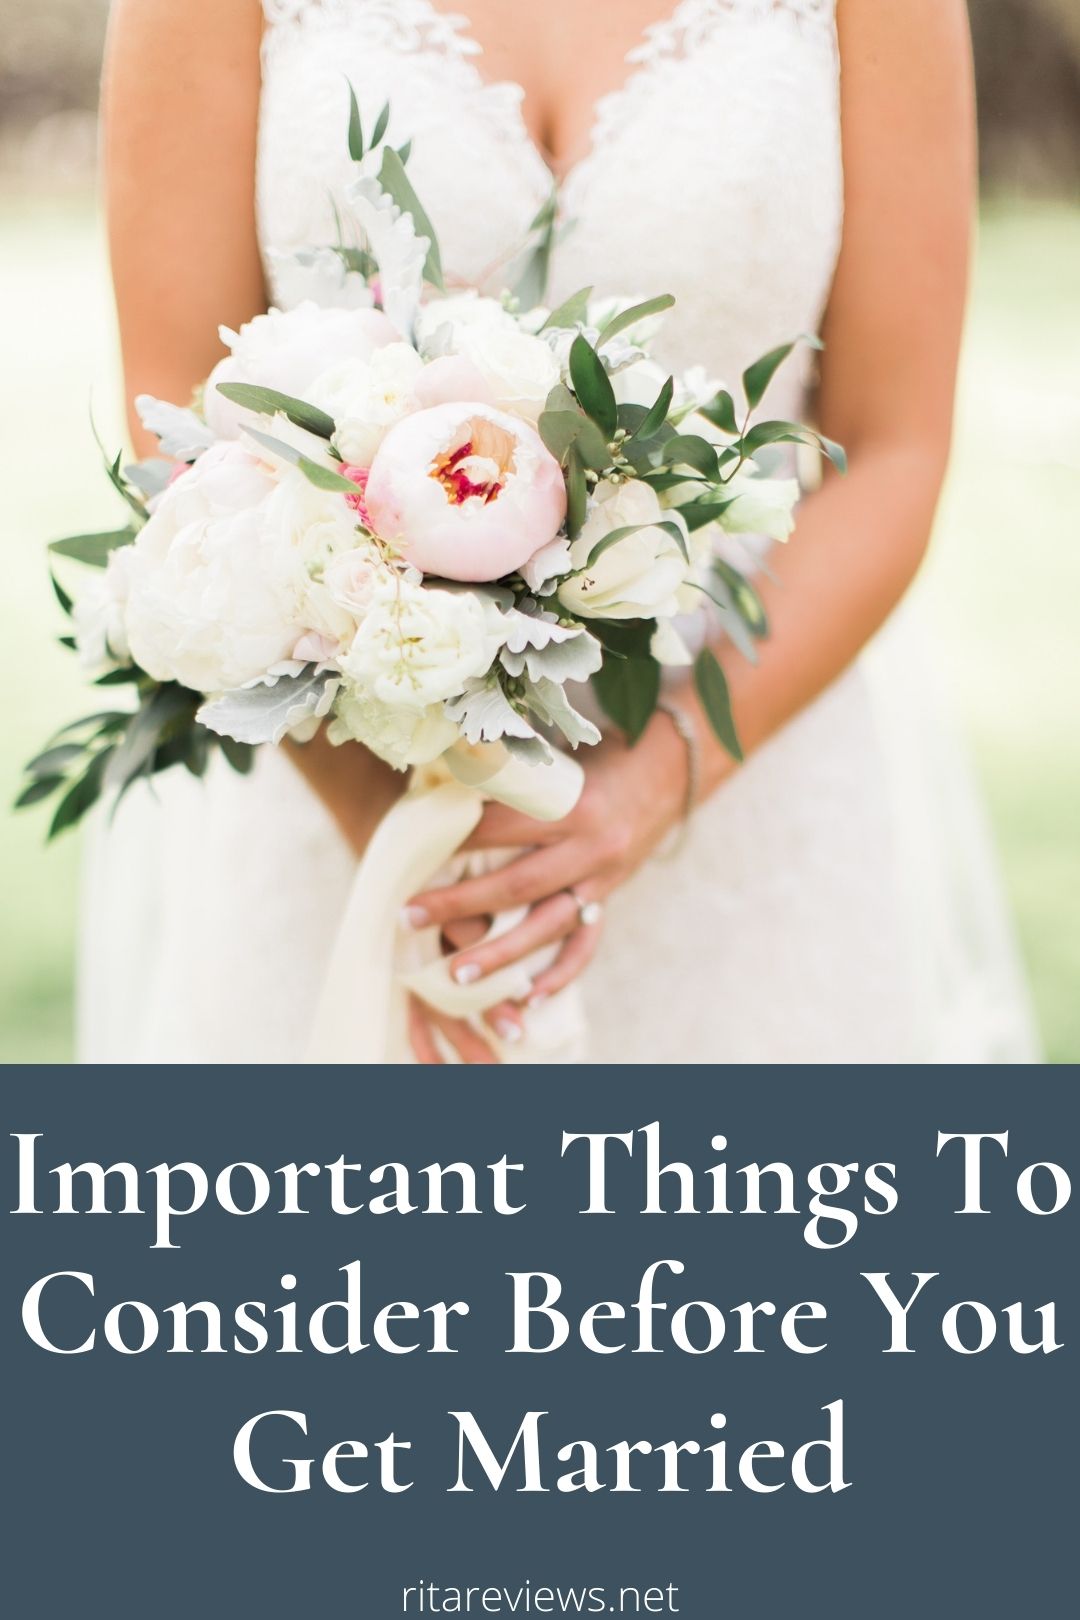 Important Things To Consider Before You Get Married